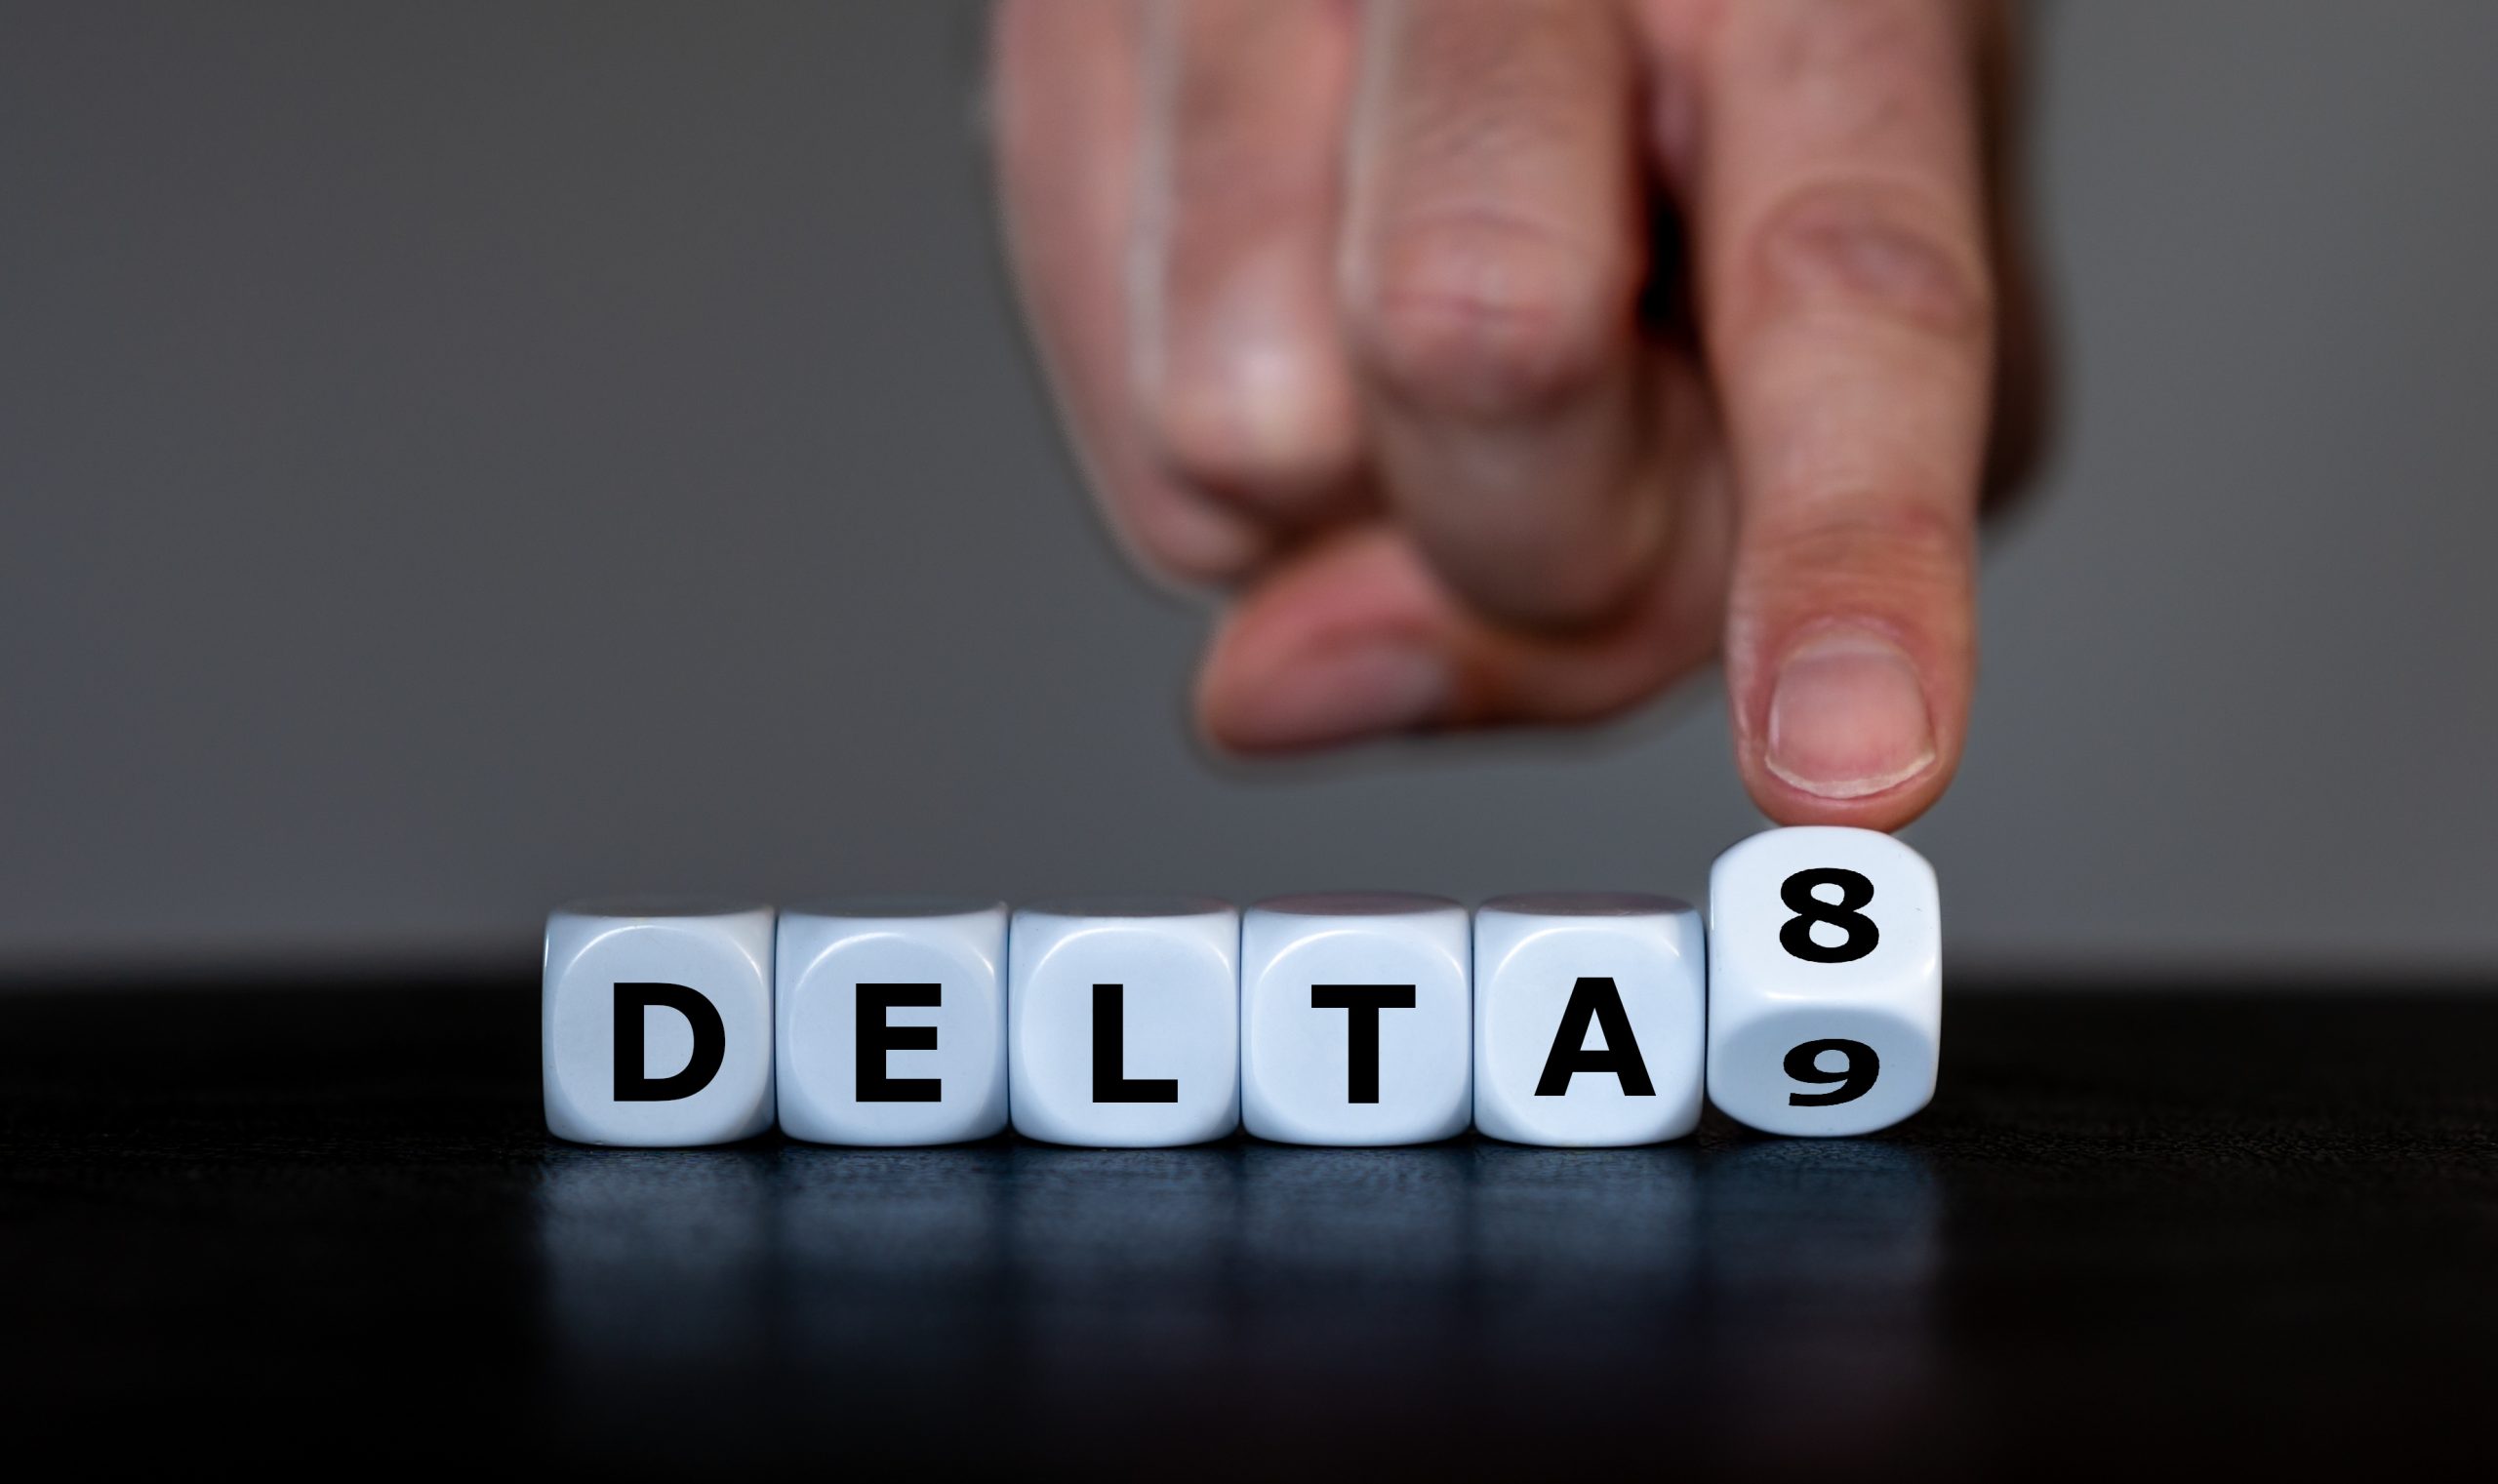 Hand turns dice and changes the expression 'delta 9' to 'delta 8'. Symbol for the Delta-8-tetrahydrocannabinol, a psychoactive cannabinoid found in the Cannabis plant.